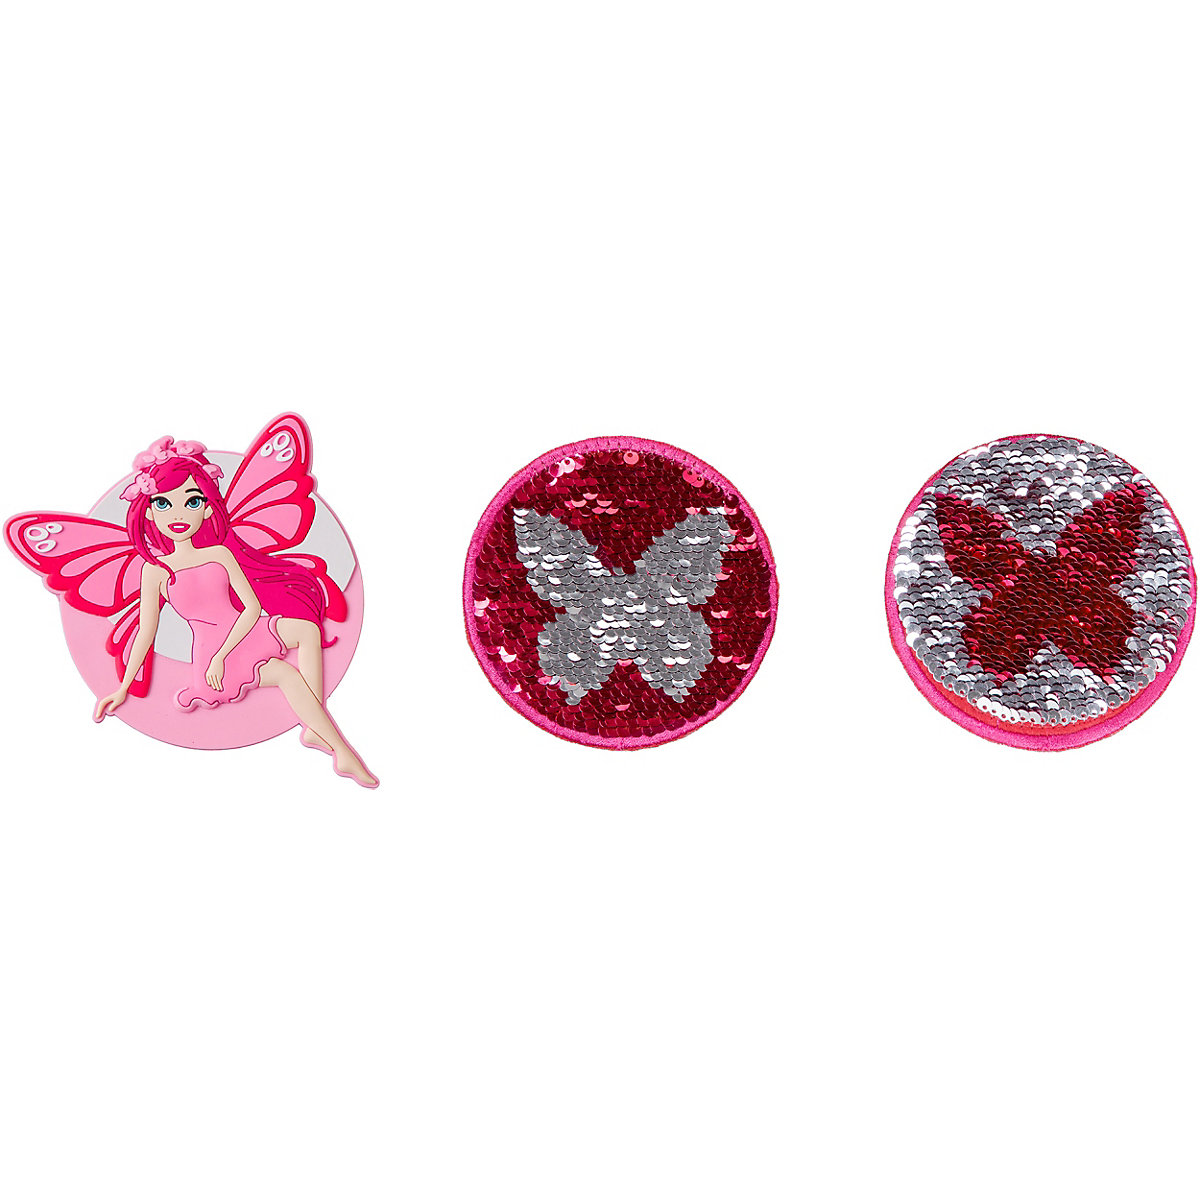 SCHNEIDERS Patches Fairy & Butterfly